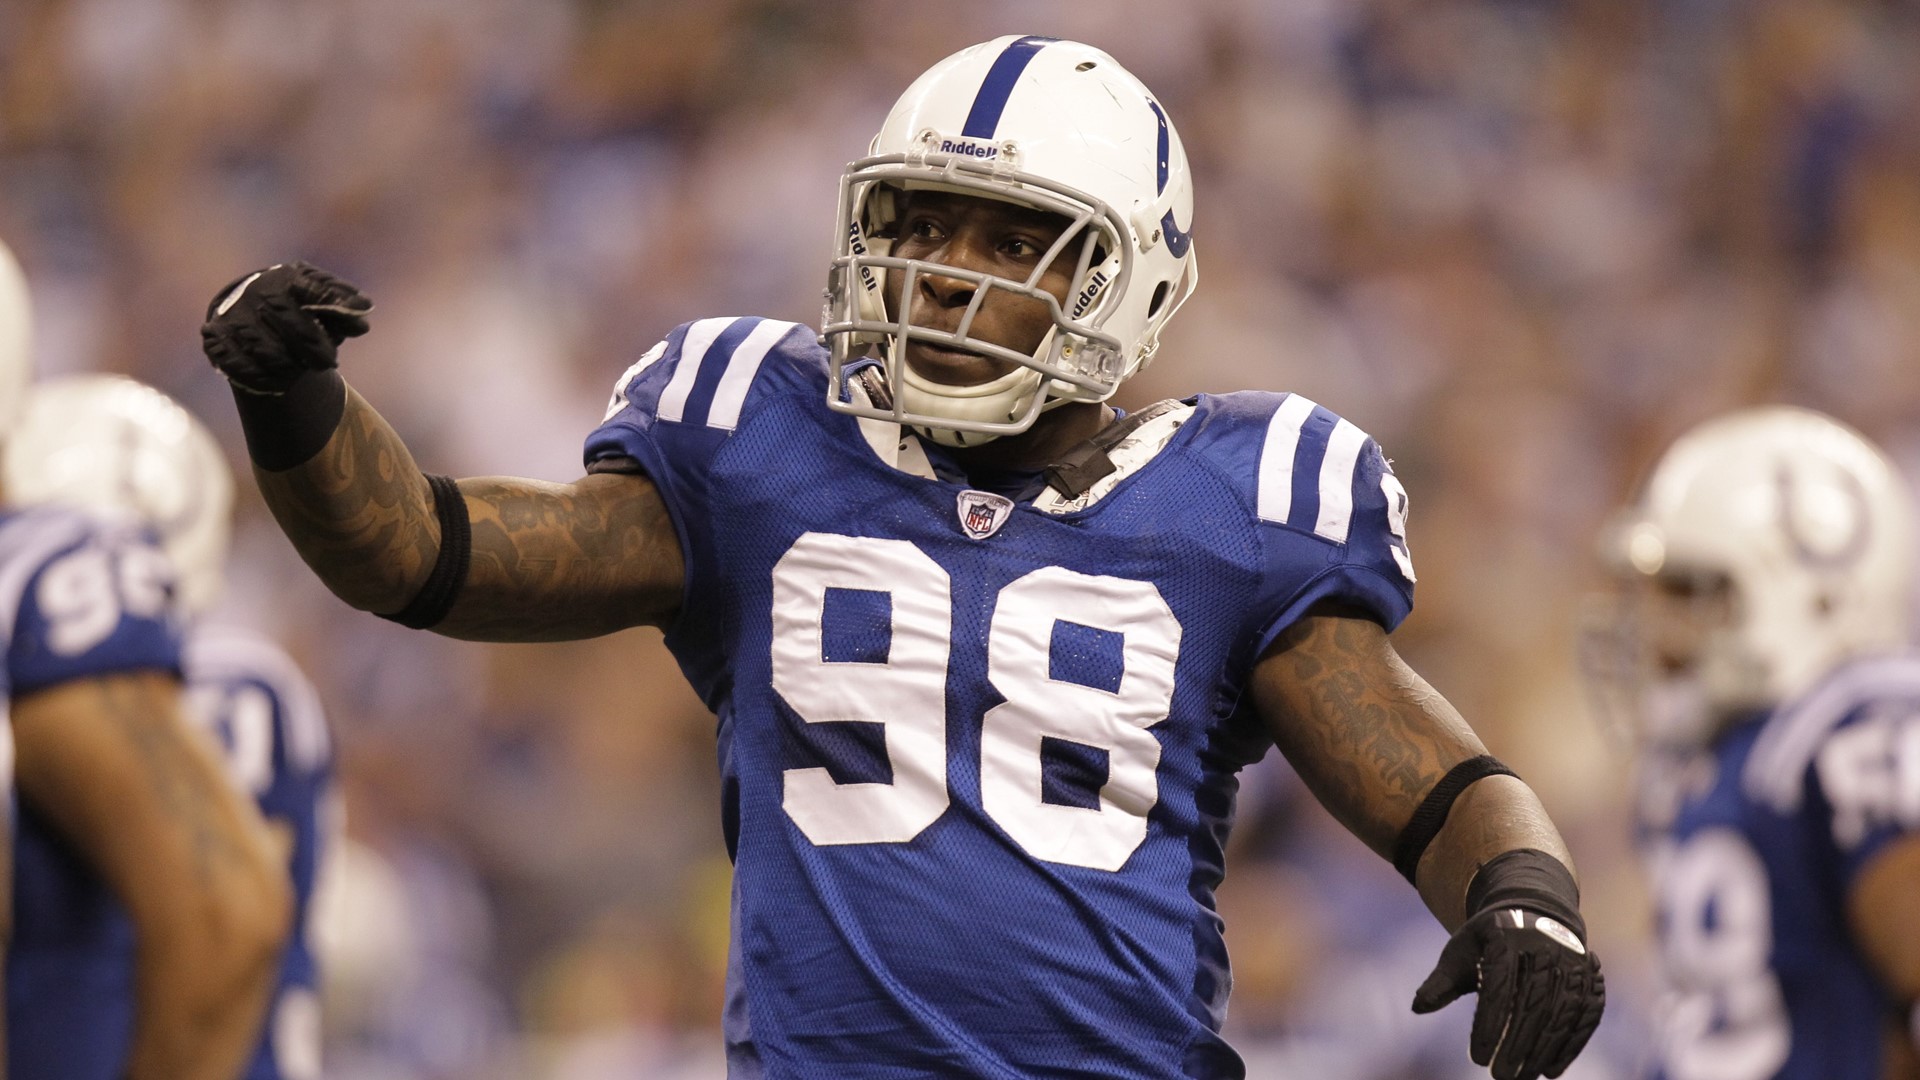 Five Colts are nominated for the 2022 class of the Pro Football Hall of Fame, including first-year eligible defensive star Robert Mathis.